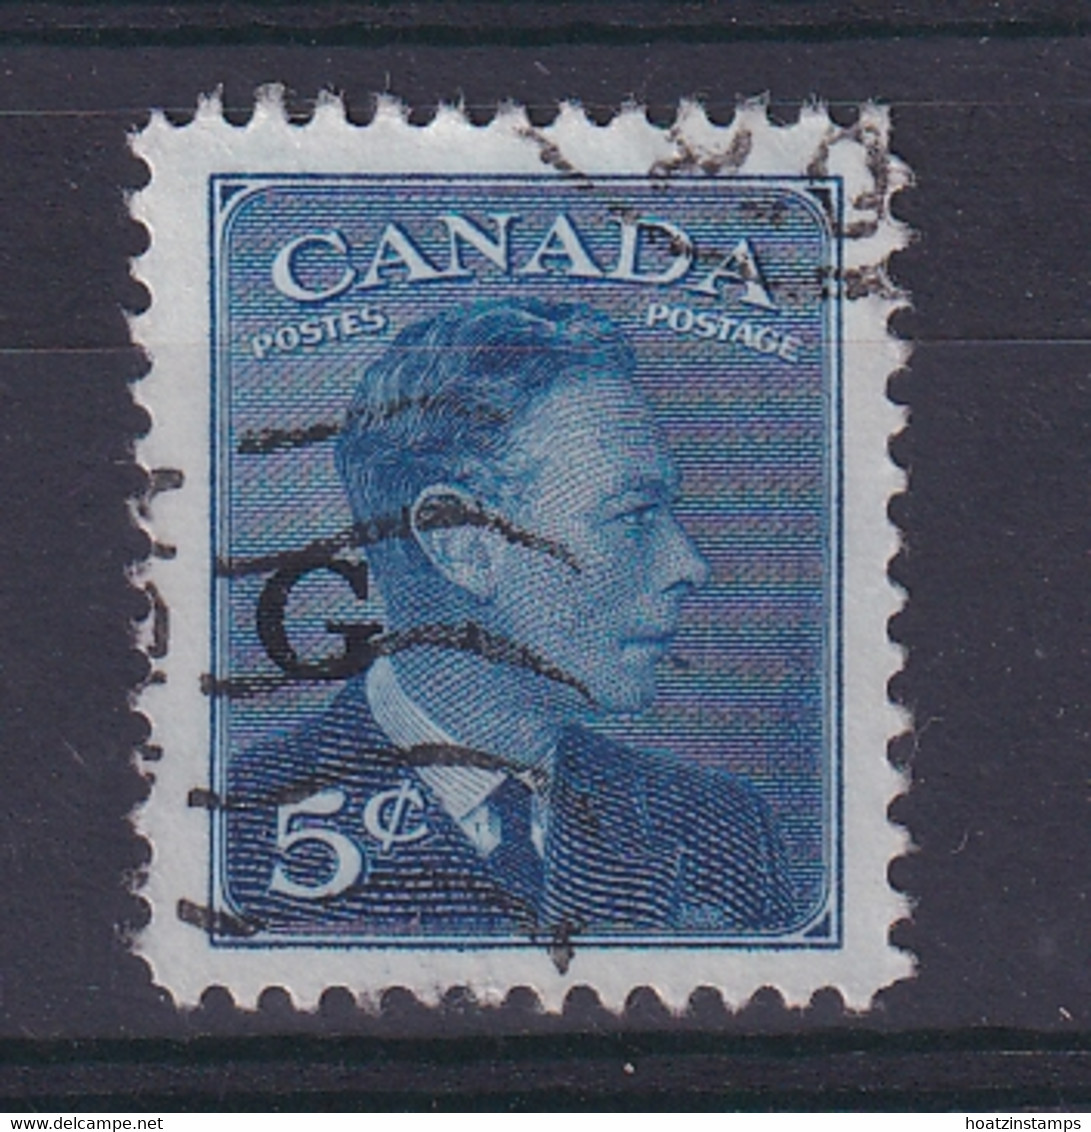 Canada: 1950/52   Official - KGVI 'G' OVPT   SG O184    5c   Used - Sovraccarichi